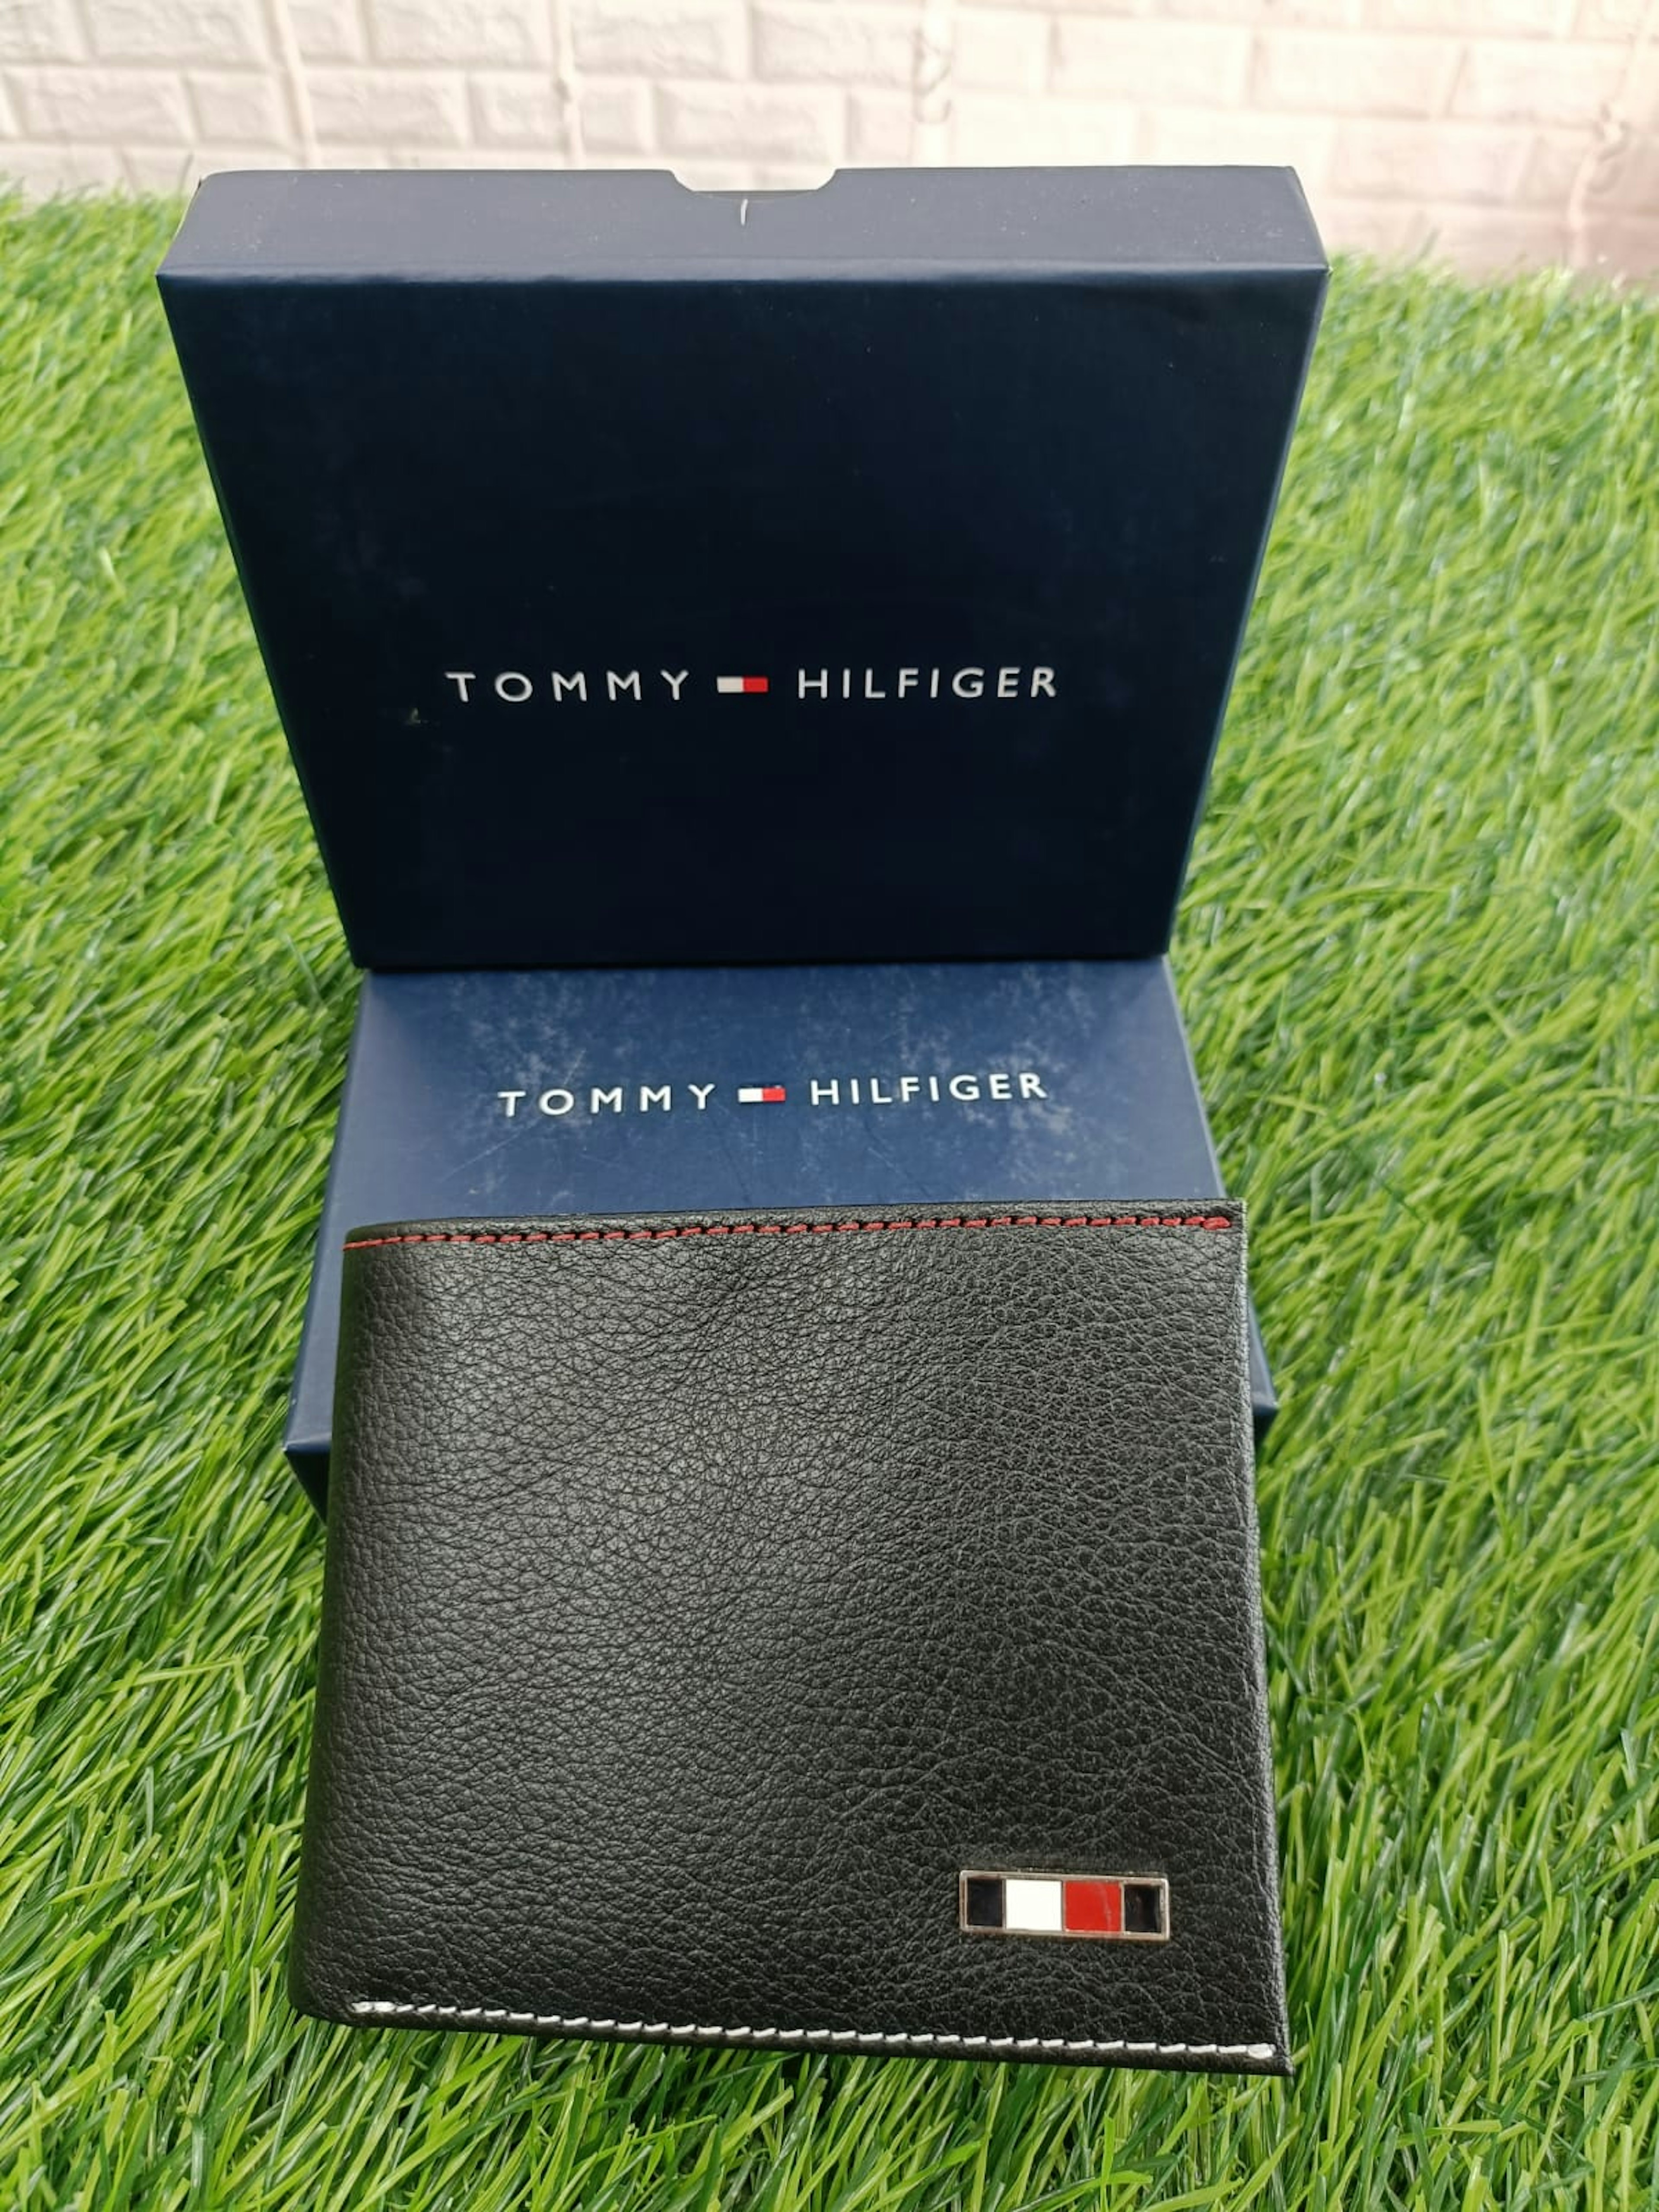 View - TOMMY HILFIGER Wallet photos, TOMMY HILFIGER Wallet available in Surendranagar, make deal in 740